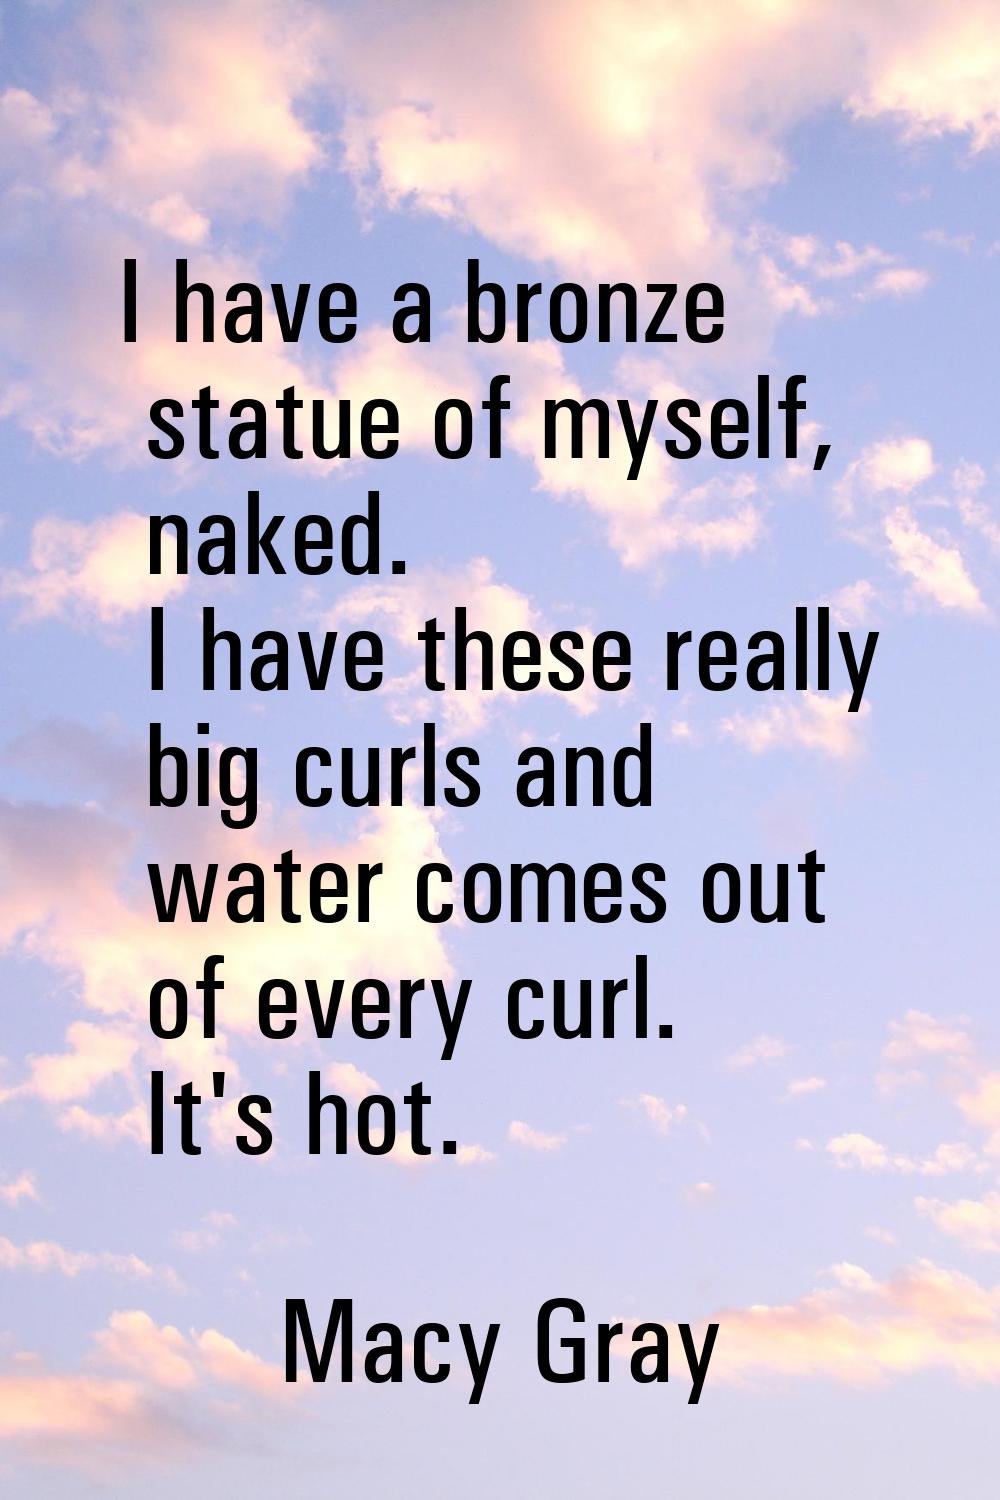 I have a bronze statue of myself, naked. I have these really big curls and water comes out of every